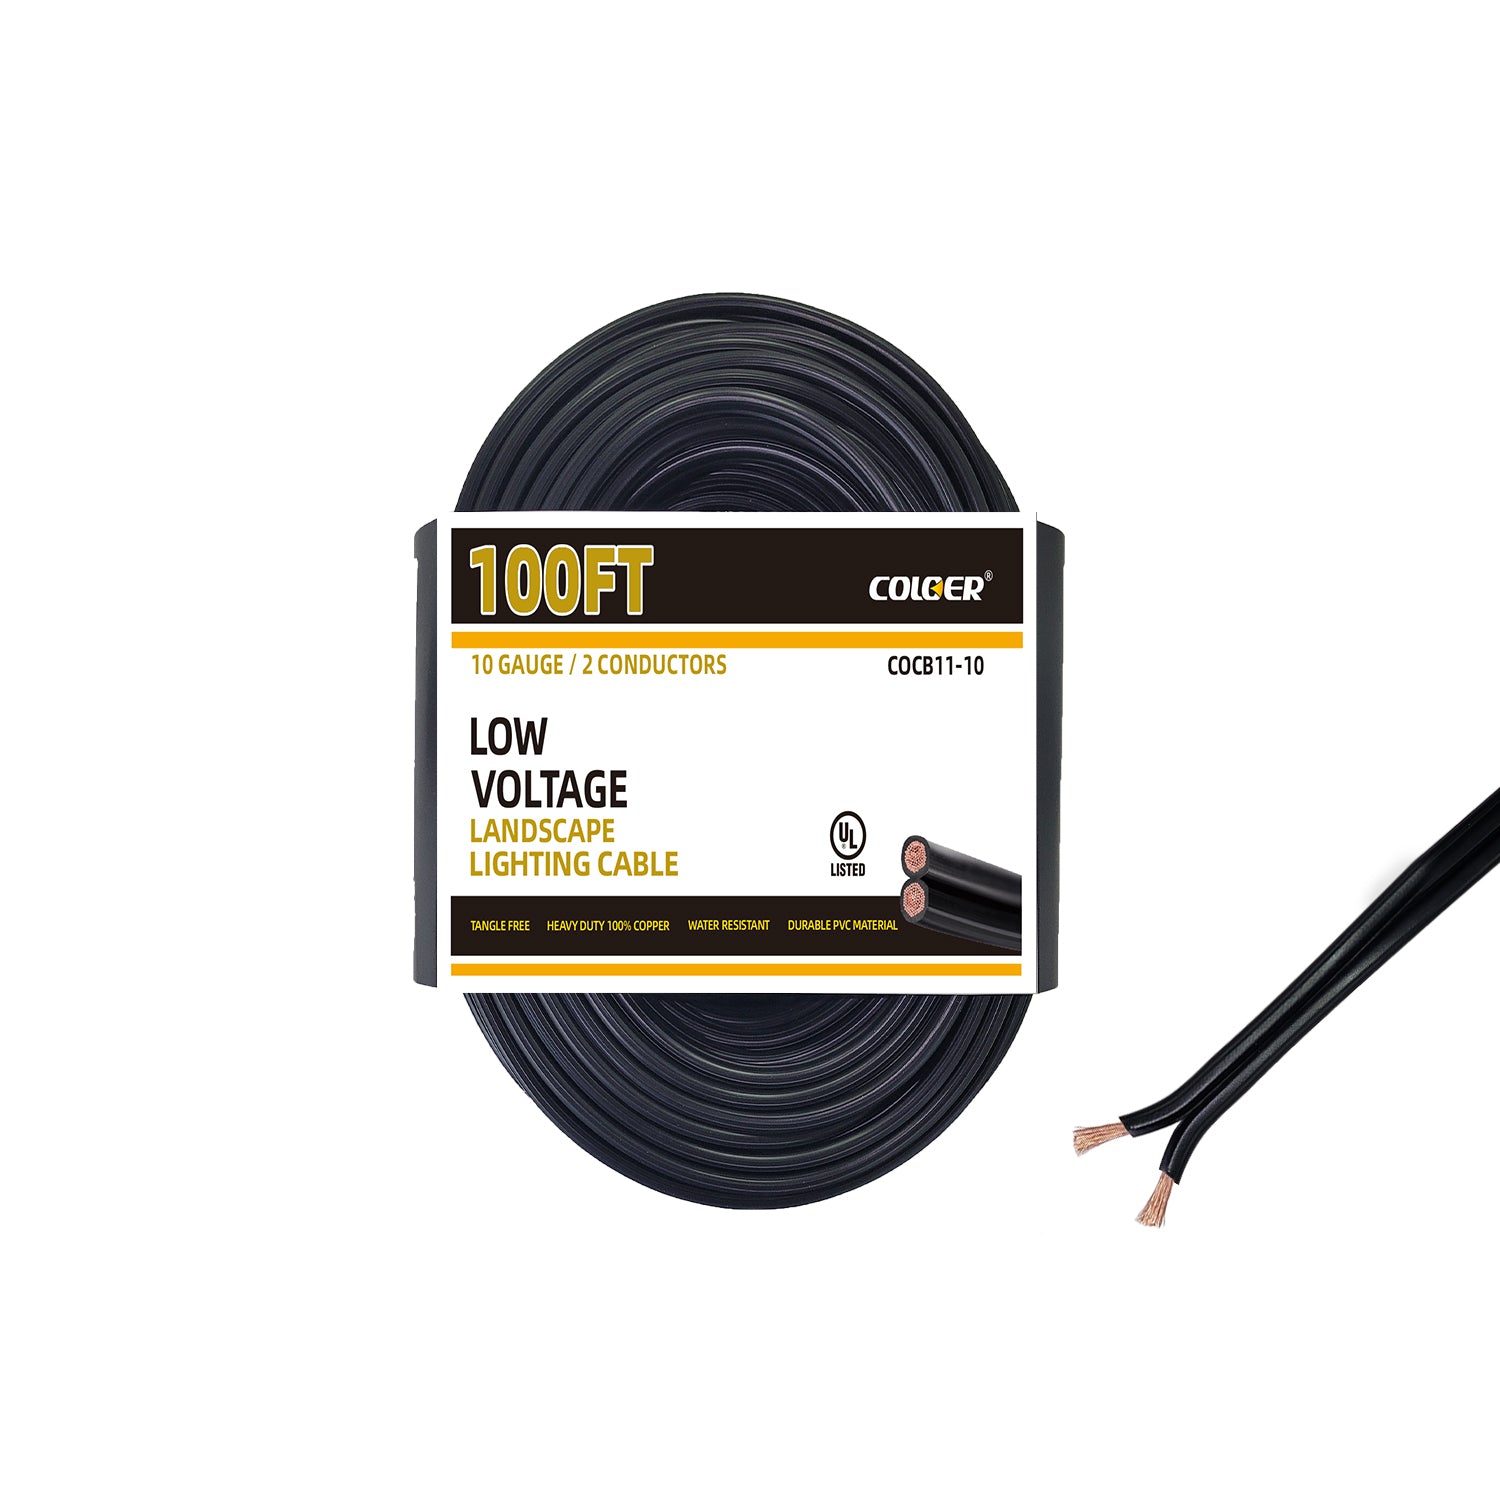 100-foot roll of COLOER 10 gauge 2 conductor low voltage landscape lighting cable suitable for direct burial